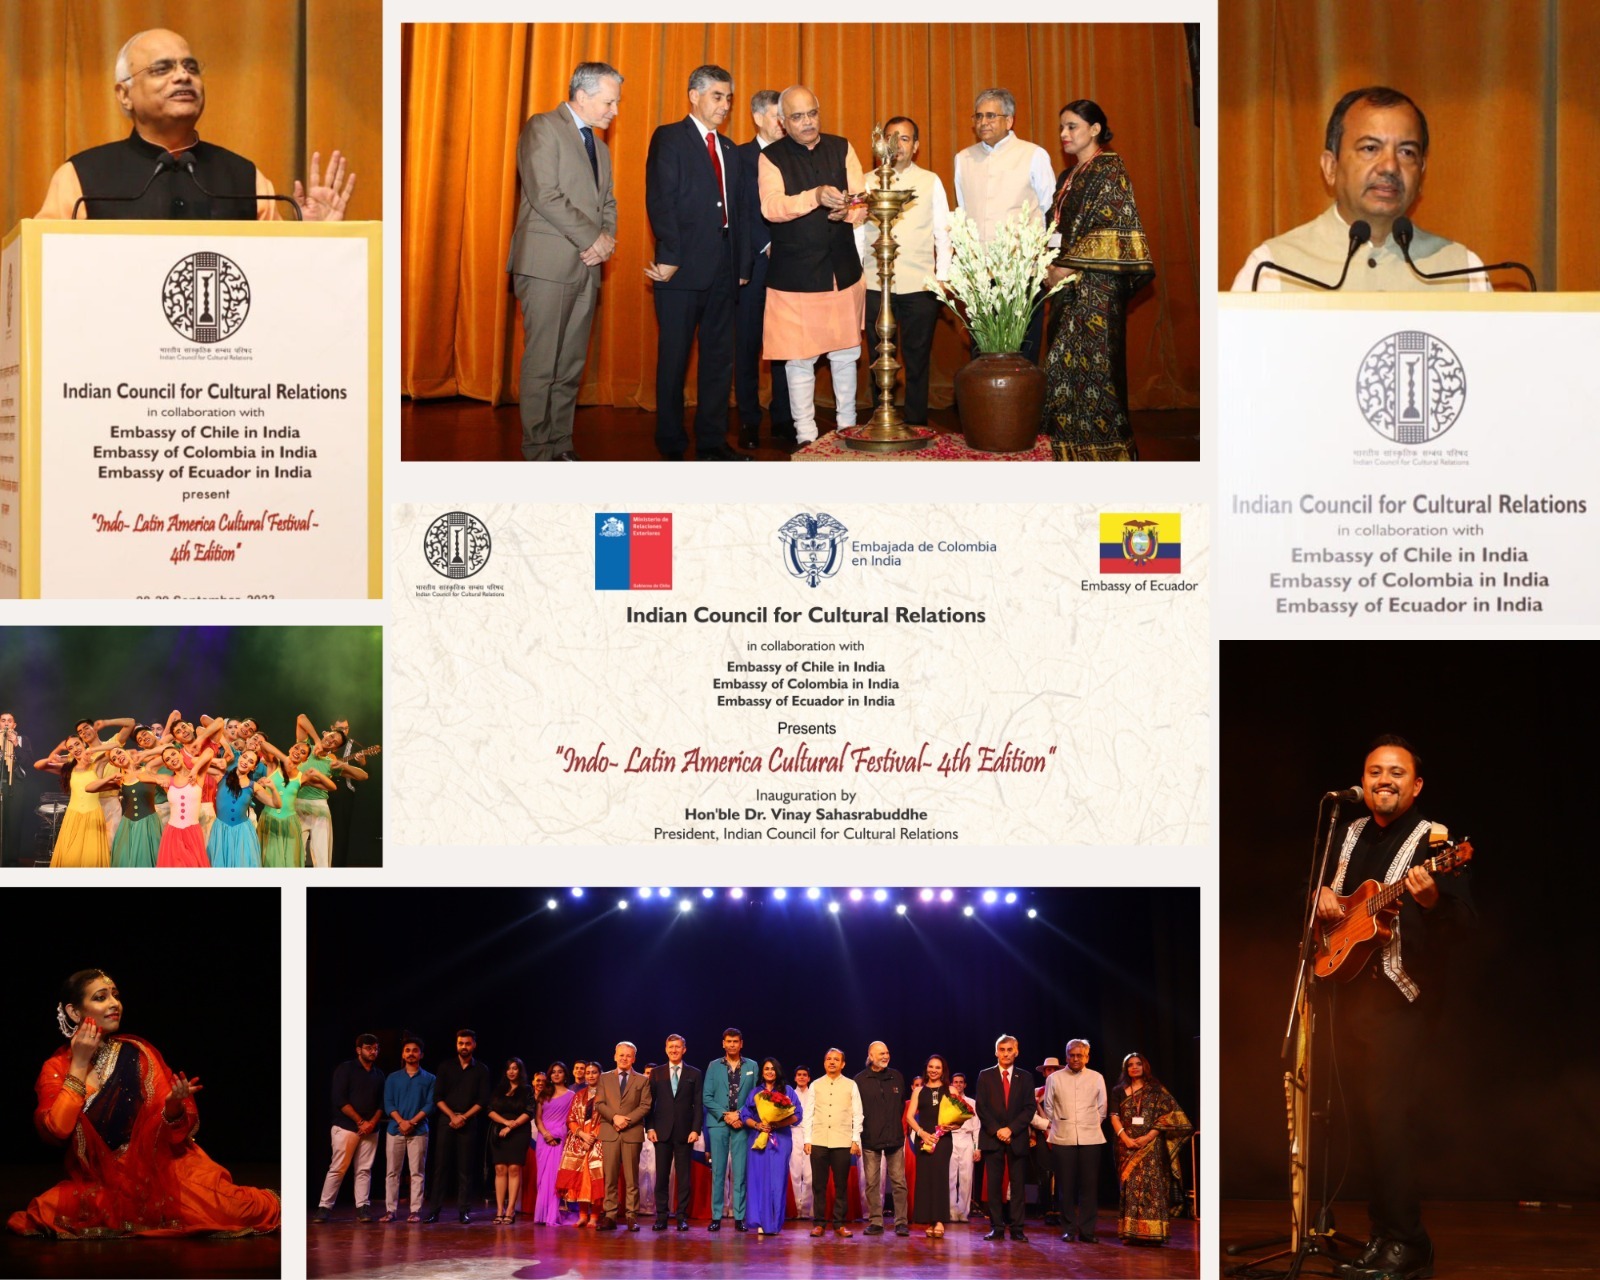 On 28 September 2023, President ICCR, Dr. Vinay Sahasrabuddhe, DG ICCR, Shri Kumar Tuhin along with the Head of Missions of Ecuador, Colombia and Chile in New Delhi, inaugurated the '4th Indo-Latin America Cultural Festival' in New Delhi.